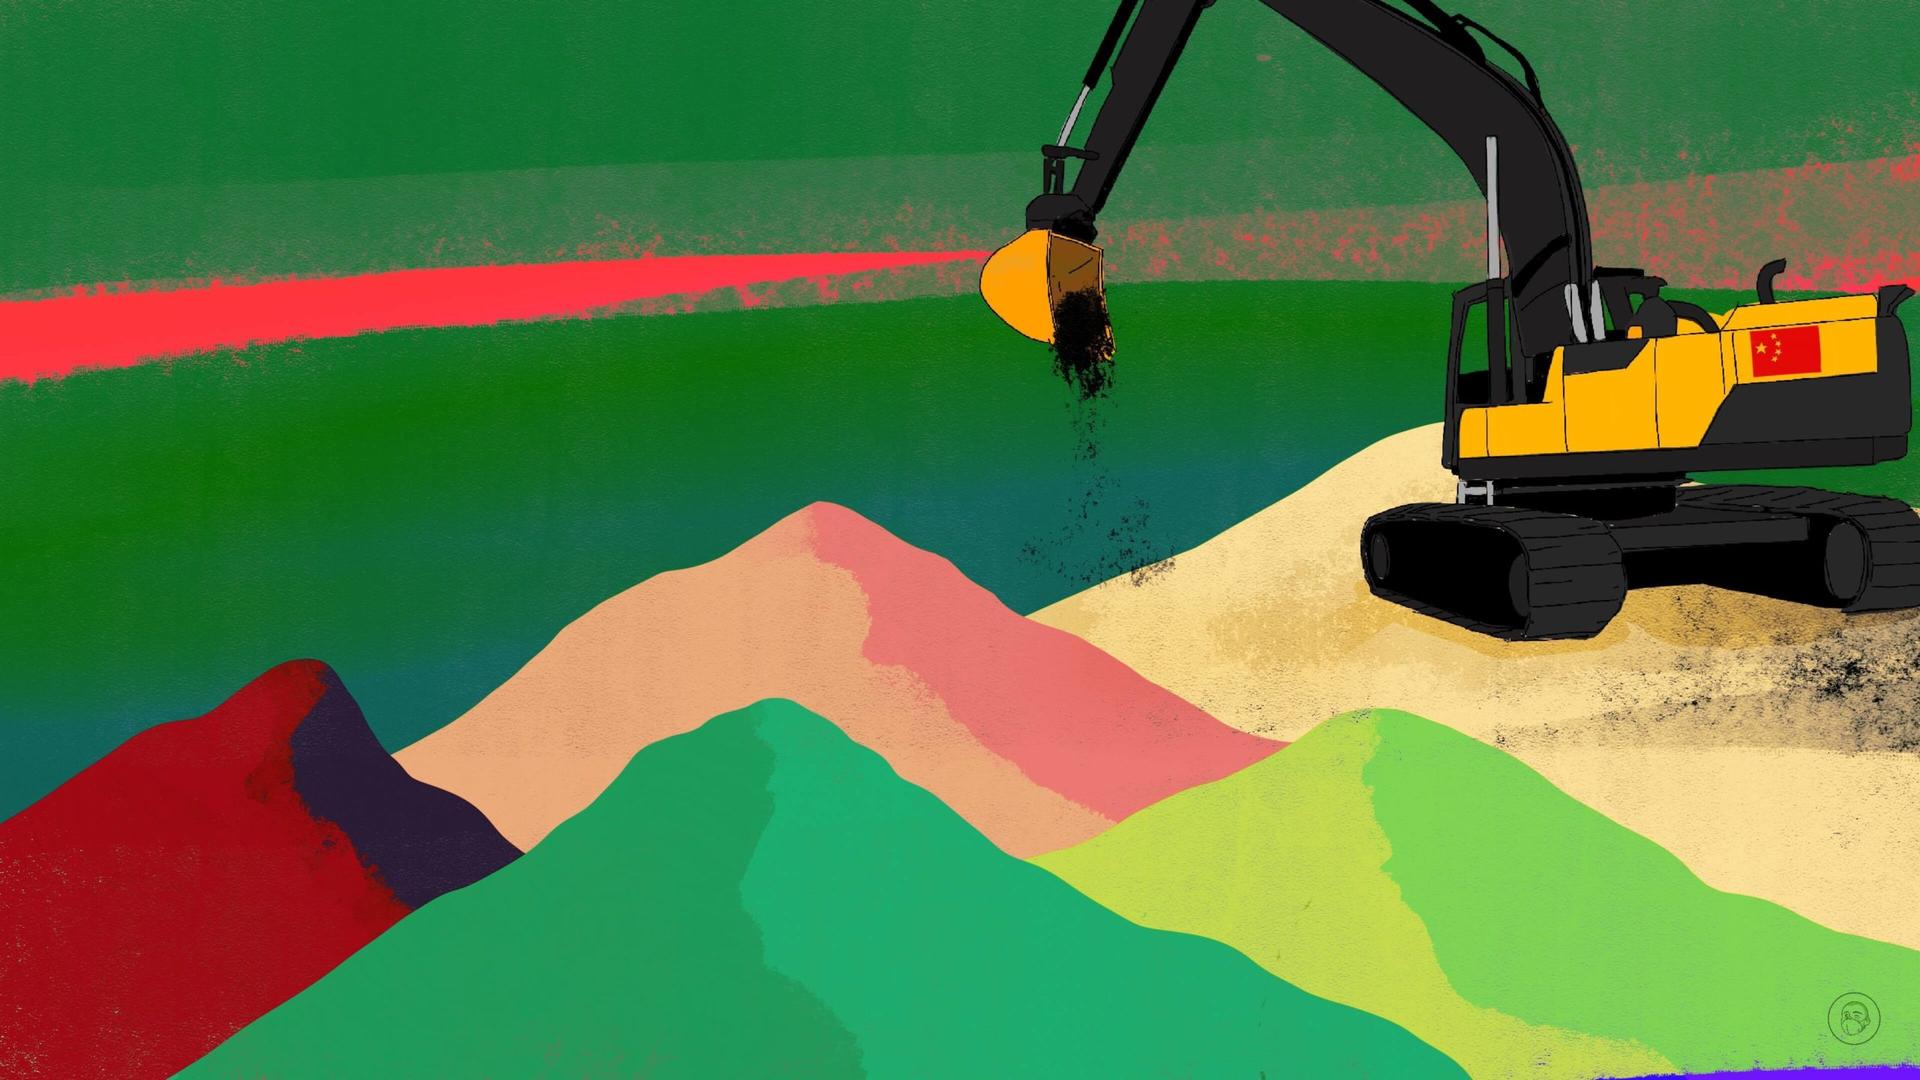 An illustration by Alex Santafe depicting an excavator working on mountains of rare earths of different colors